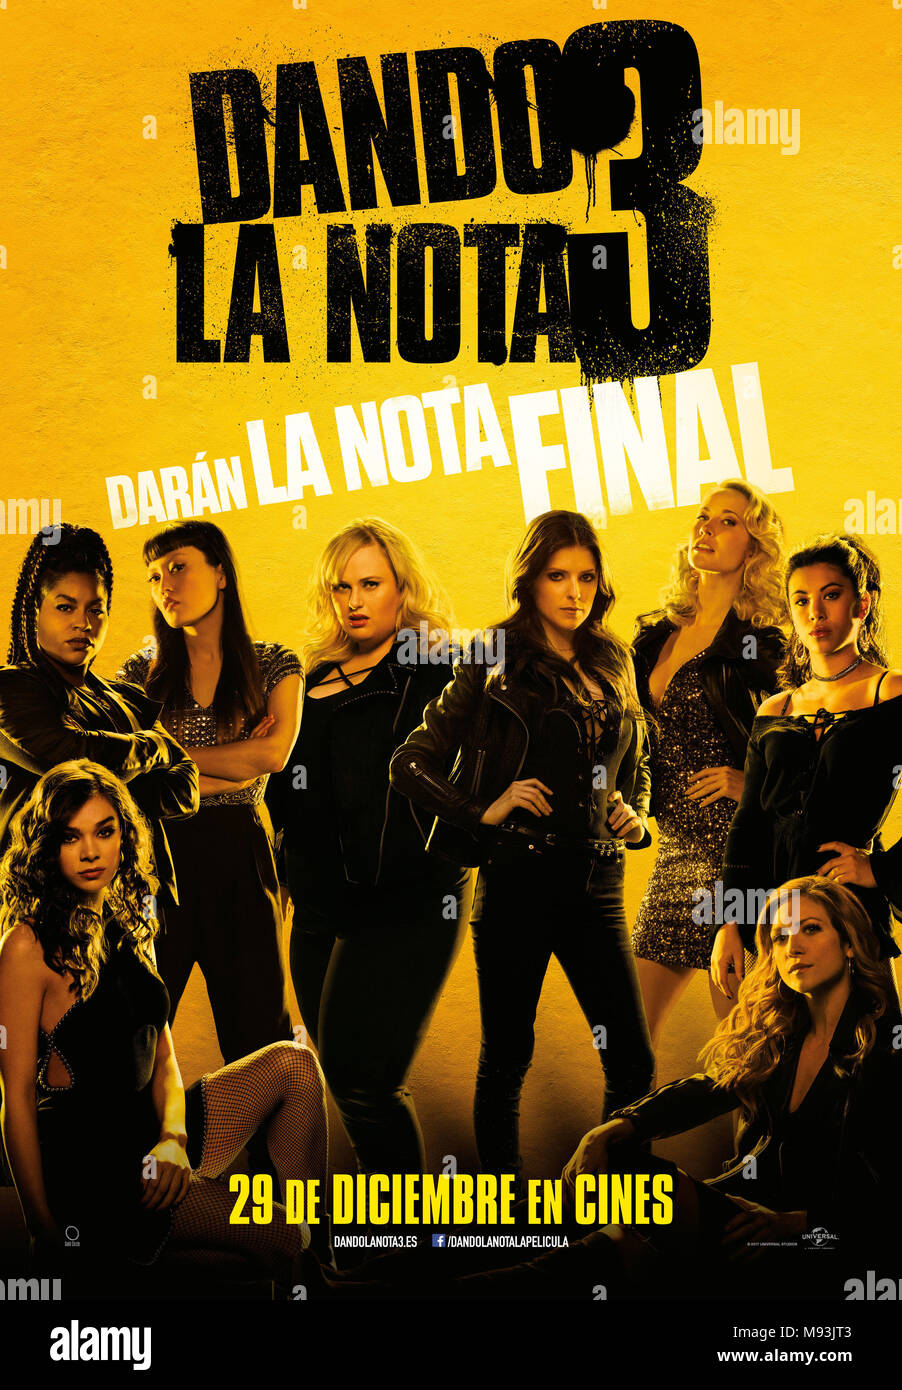 RELEASE DATE: December 22, 2107 TITLE: Pitch Perfect 3 STUDIO: Universal Pictures DIRECTOR: Trish Sie PLOT: Following their win at the world championship, the now separated Bellas reunite for one last singing competition at an overseas USO tour, but face a group who uses both instruments and voices. STARRING: Poster Art Spanish. (Credit Image: © Universal Pictures/Entertainment Pictures) Stock Photo